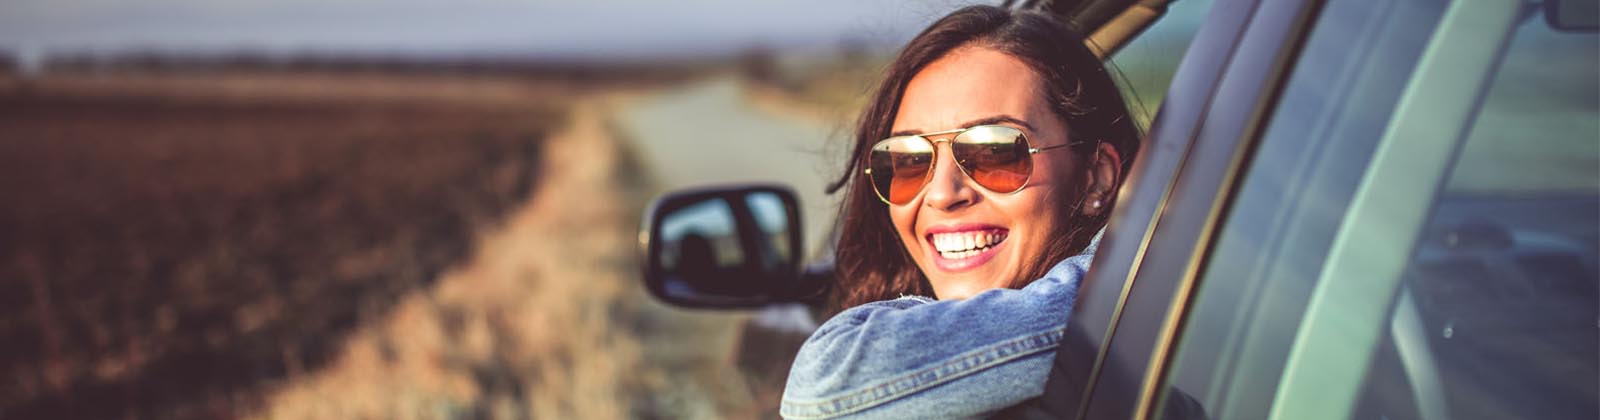 woman looking out her car window smiling